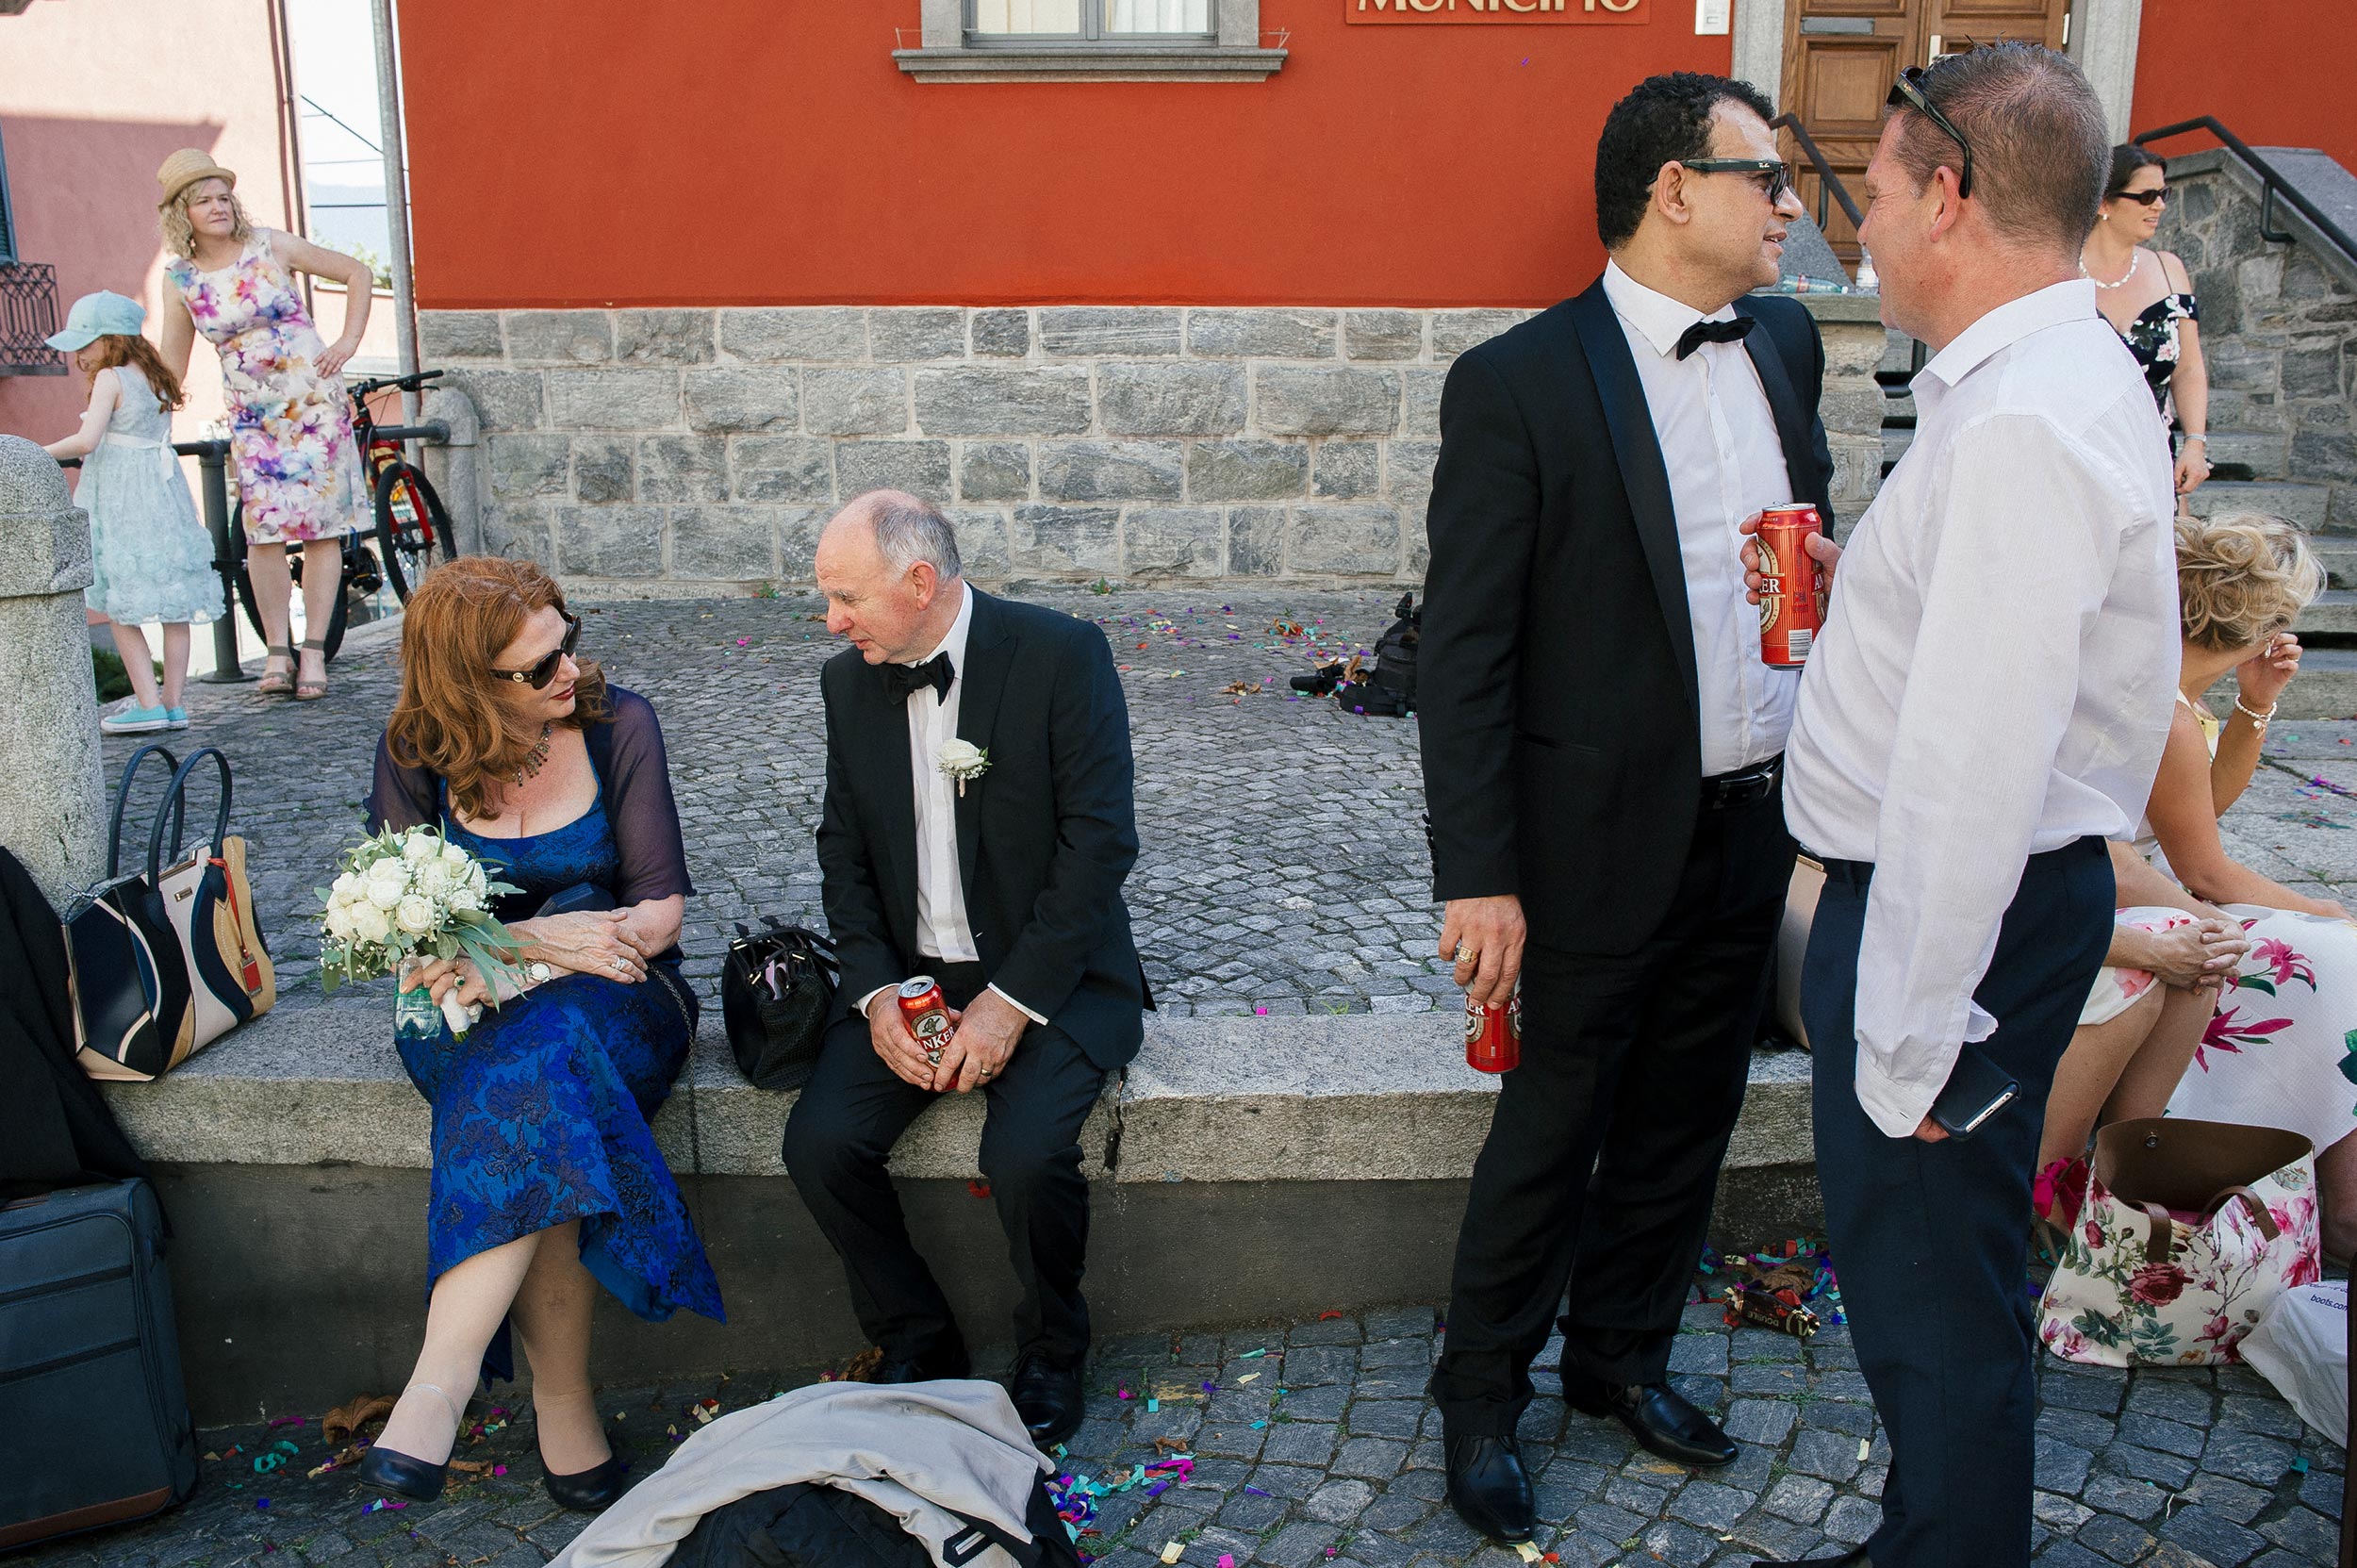 relaxed-moment-drinking-beer-after-wedding-ceremony.jpg